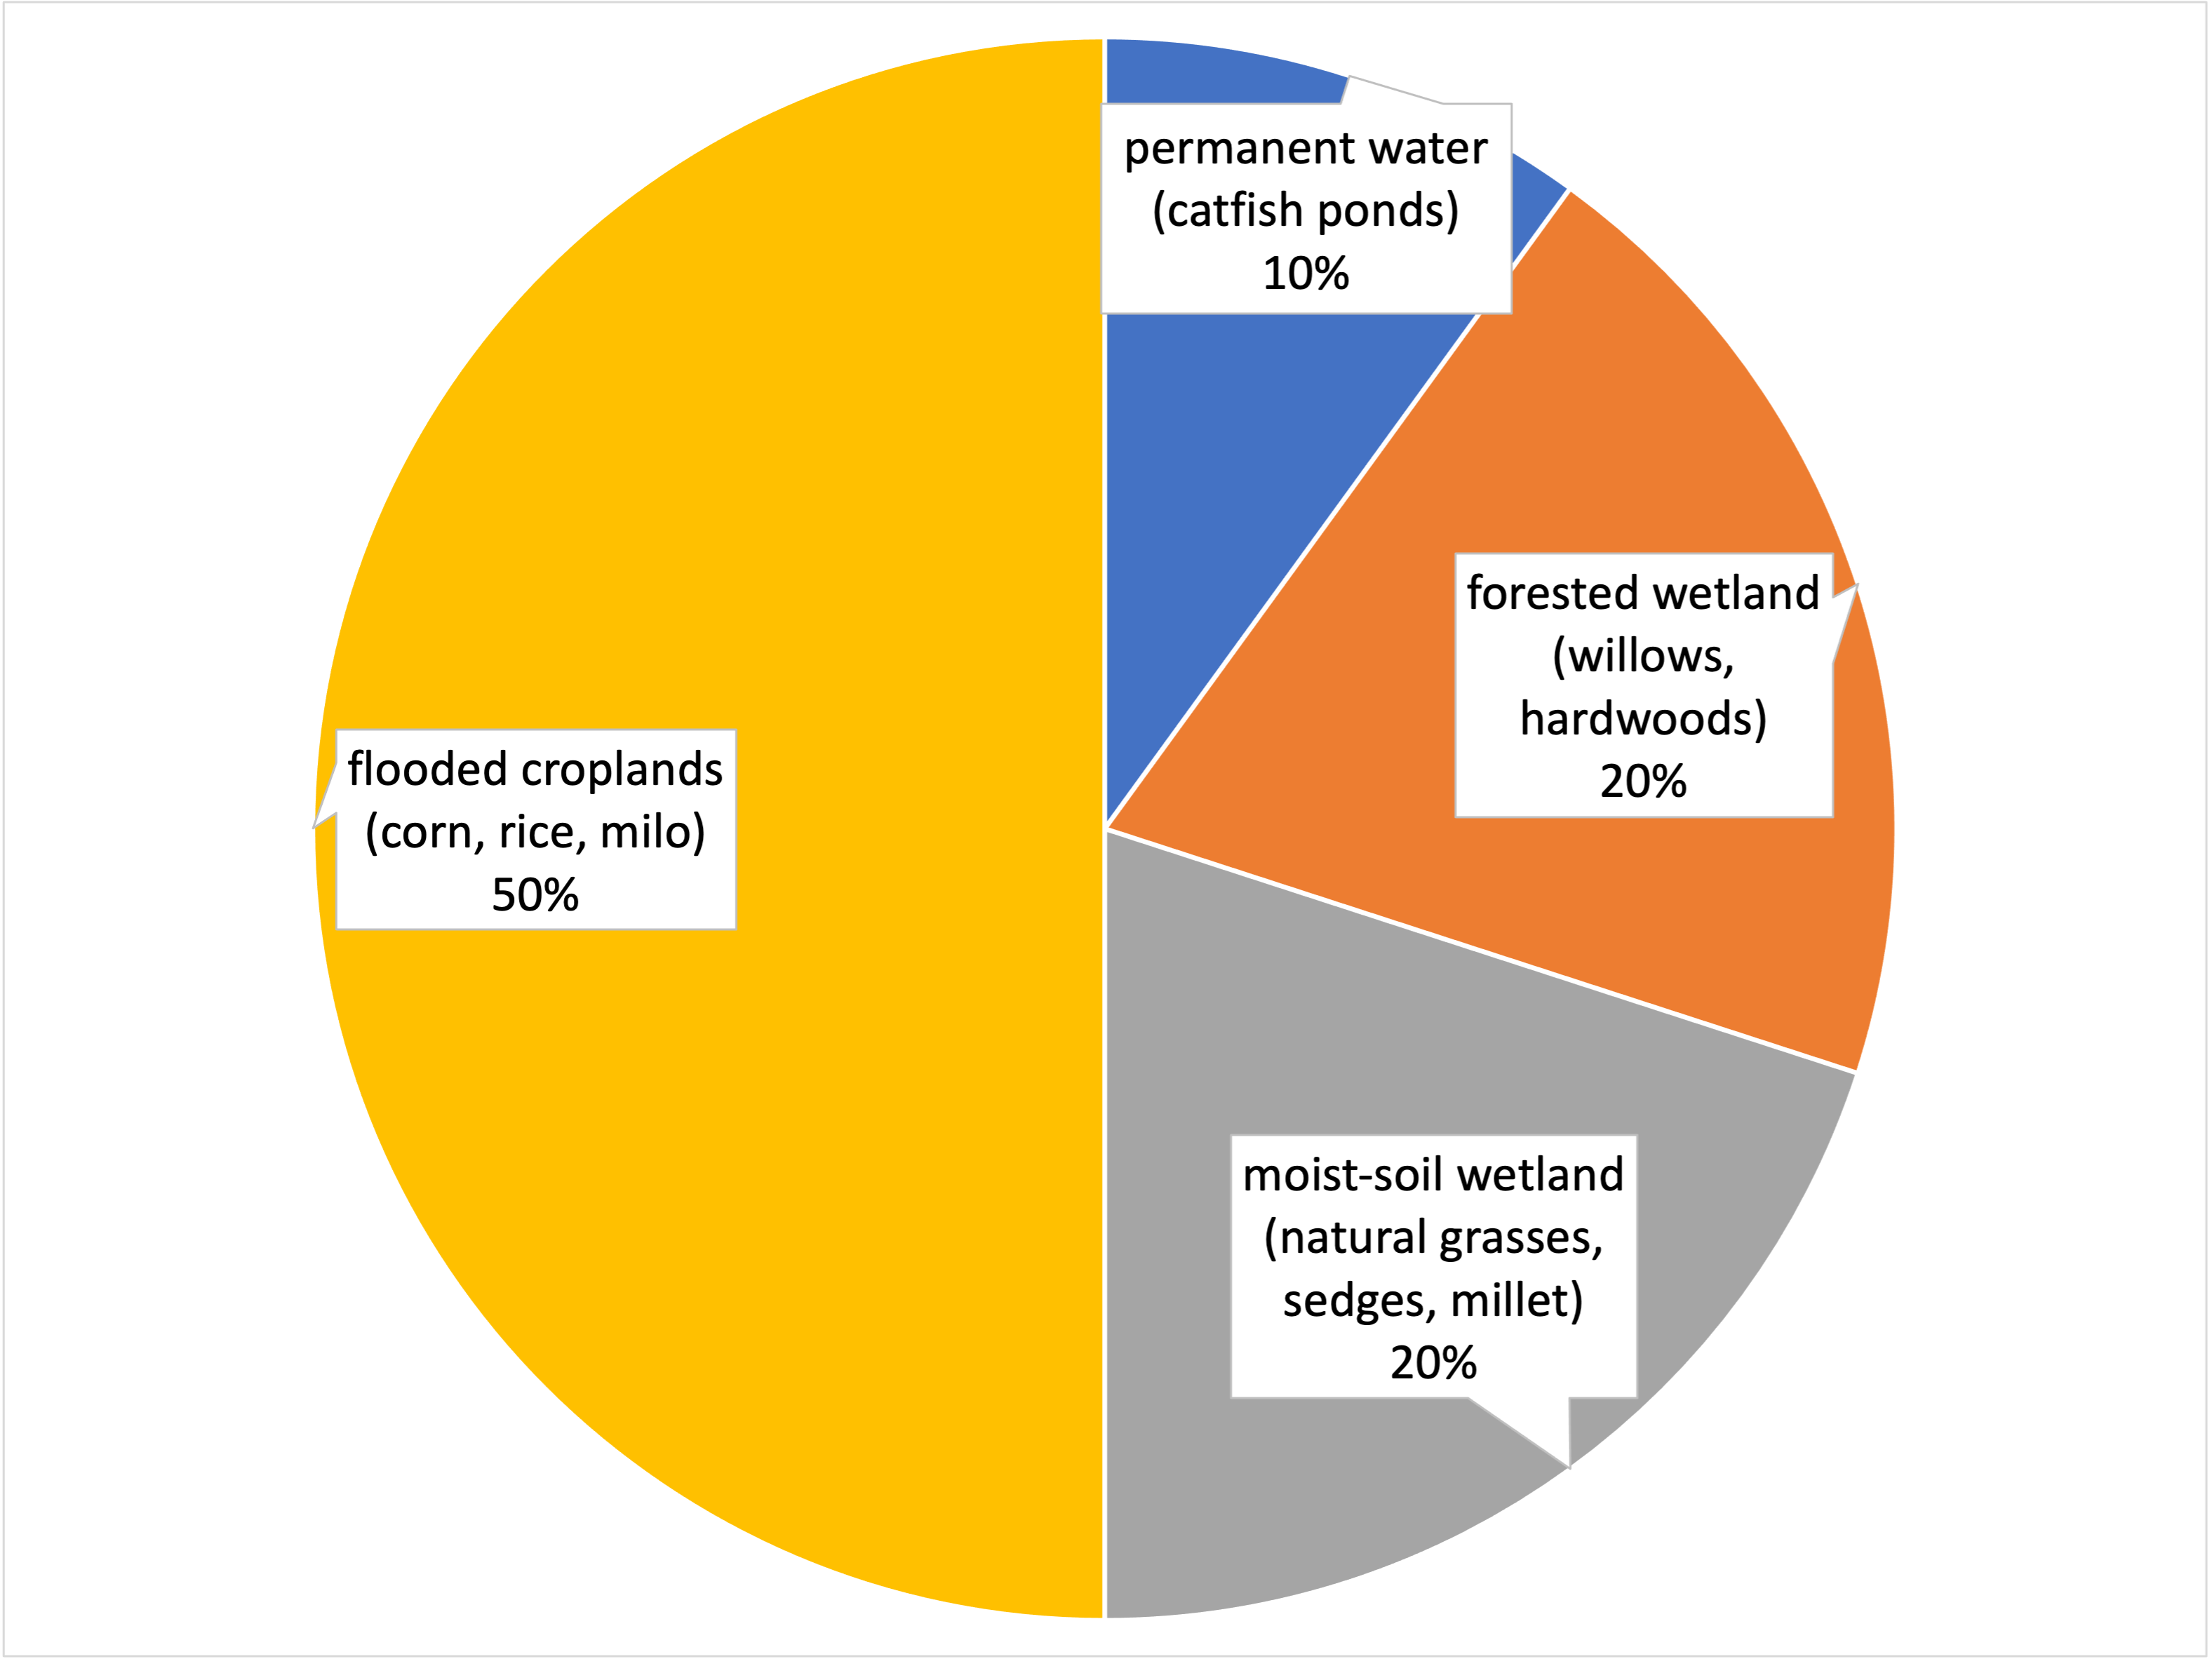 Pie chart: flooded croplands (corn, rice, milo), 50%; moist-soil wetland (natural grasses, sedges, millet), 20%; forested wetland (willows, hardwoods), 20%; permanent water (catfish ponds), 10%.